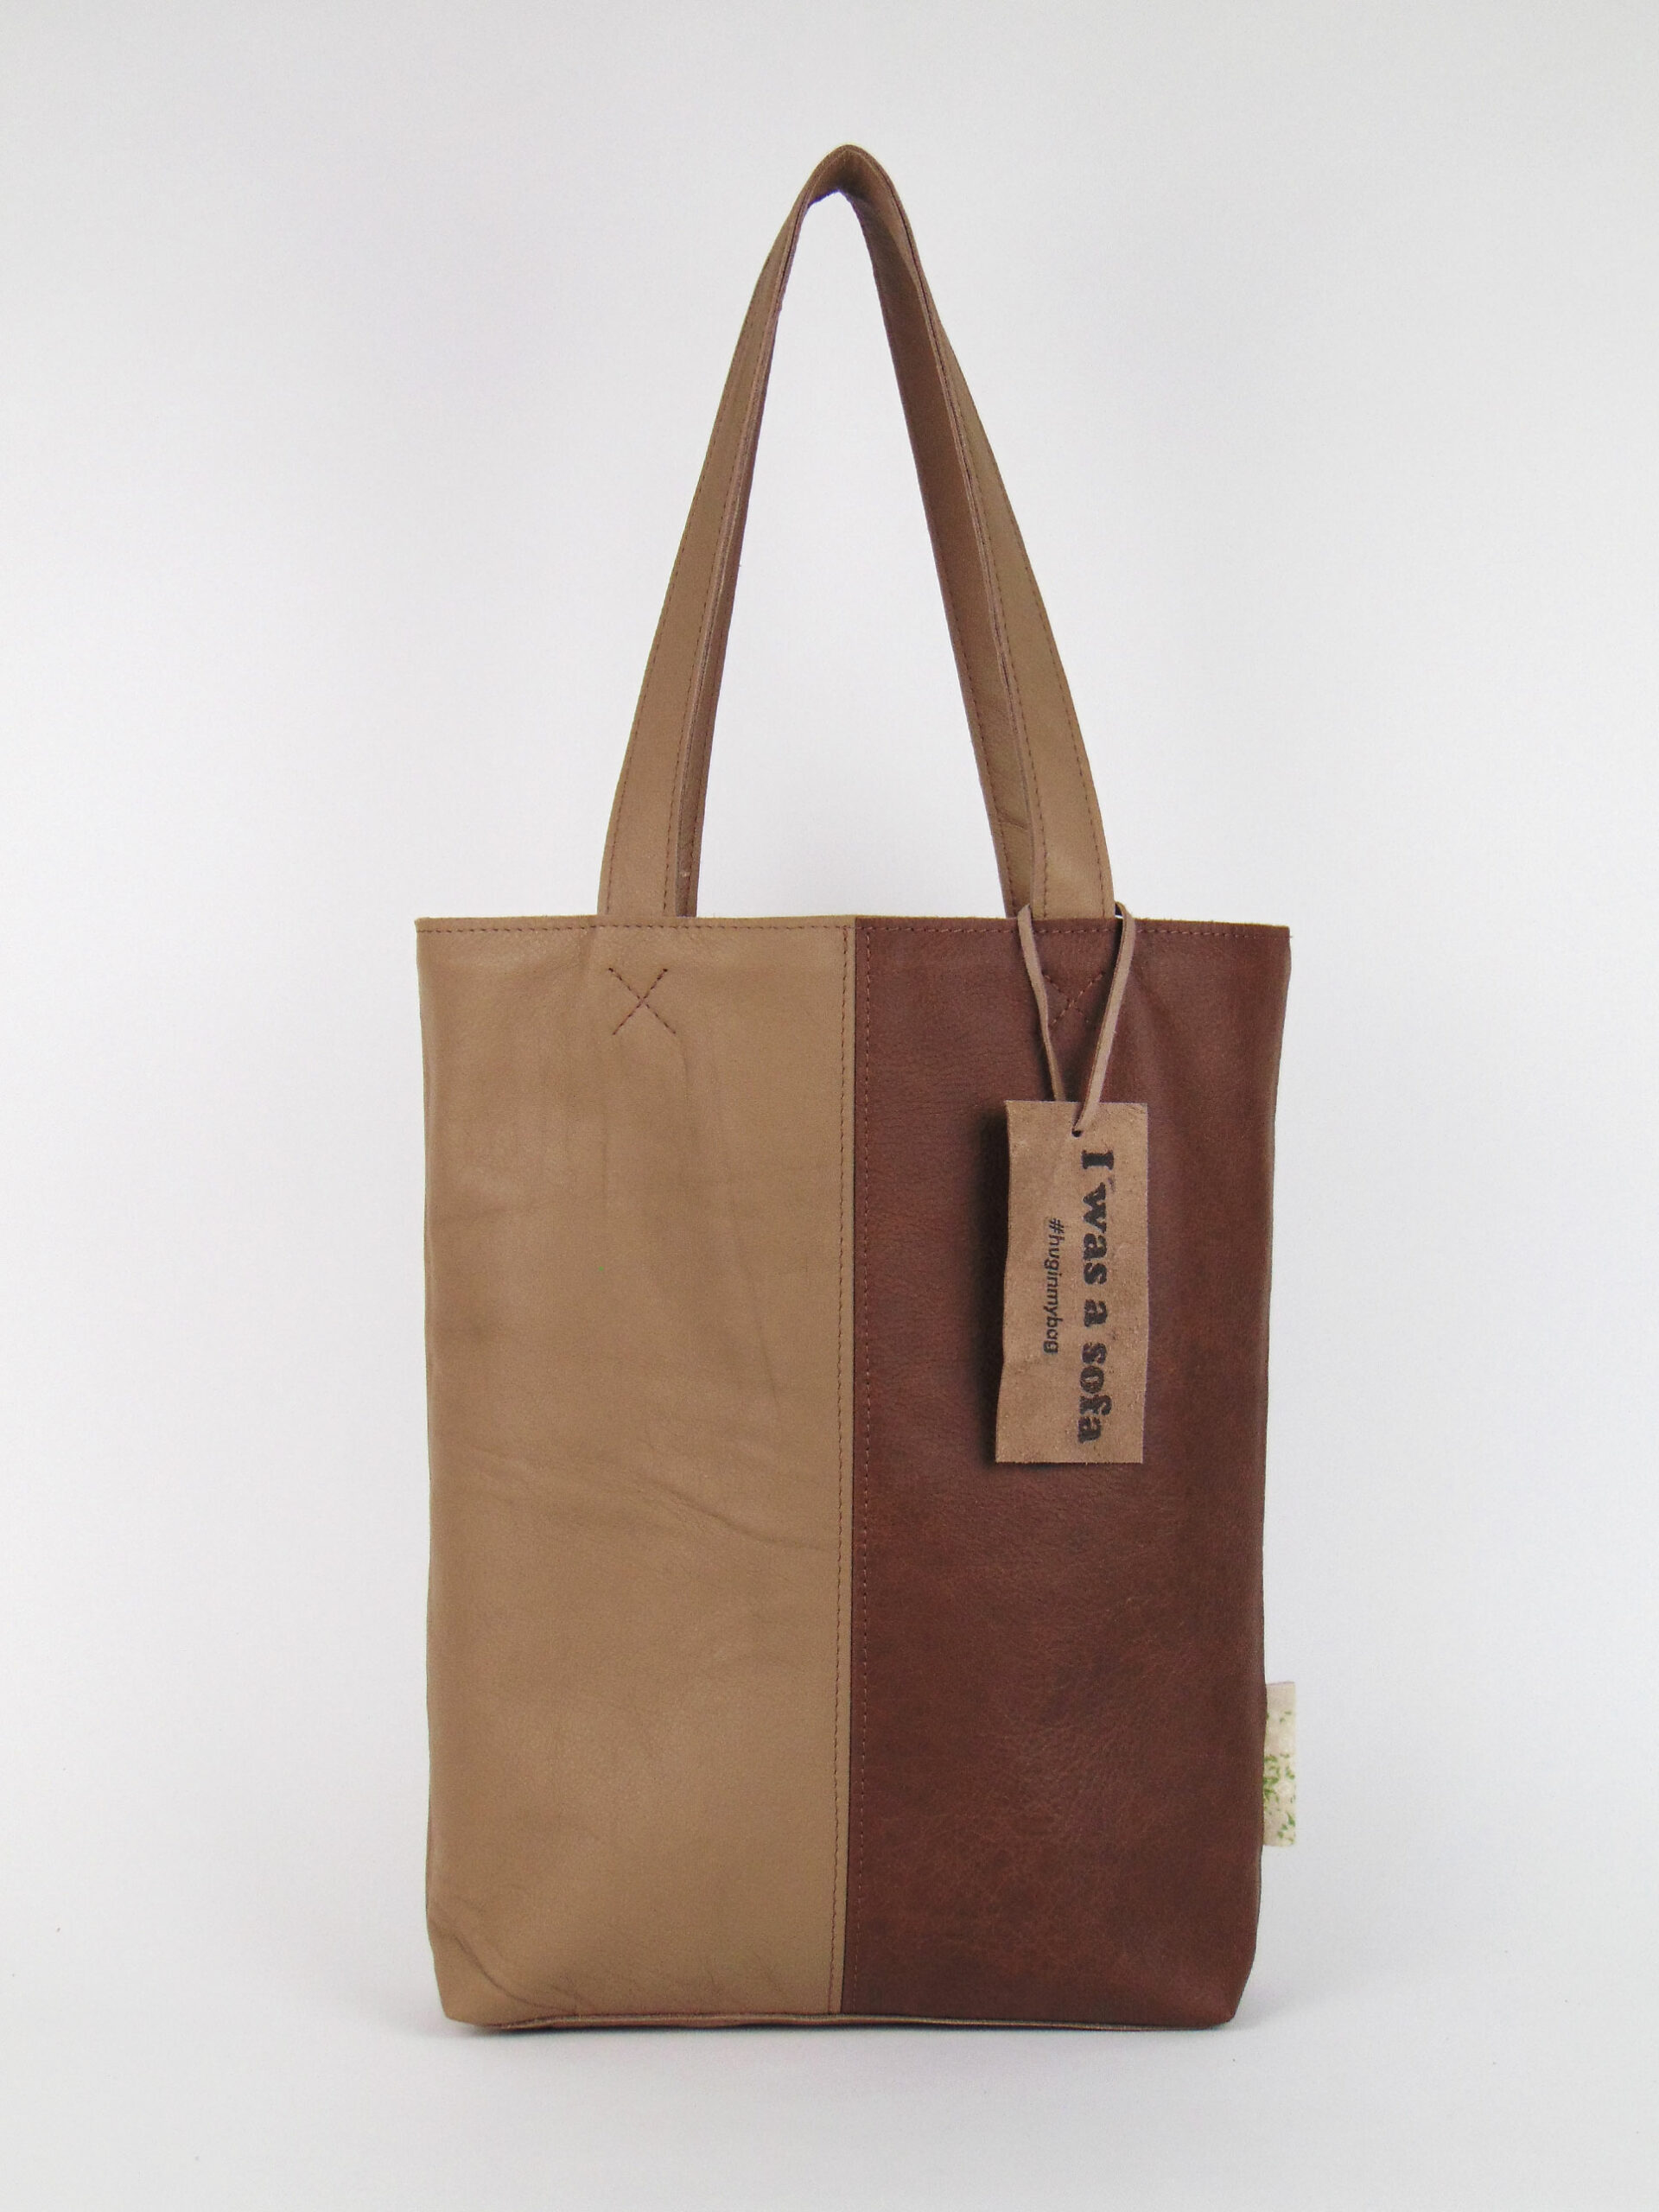 Product image of the shopper named Creamy Mocha. This shopper is made from recycled leather in a colour combination of beige and taupe.